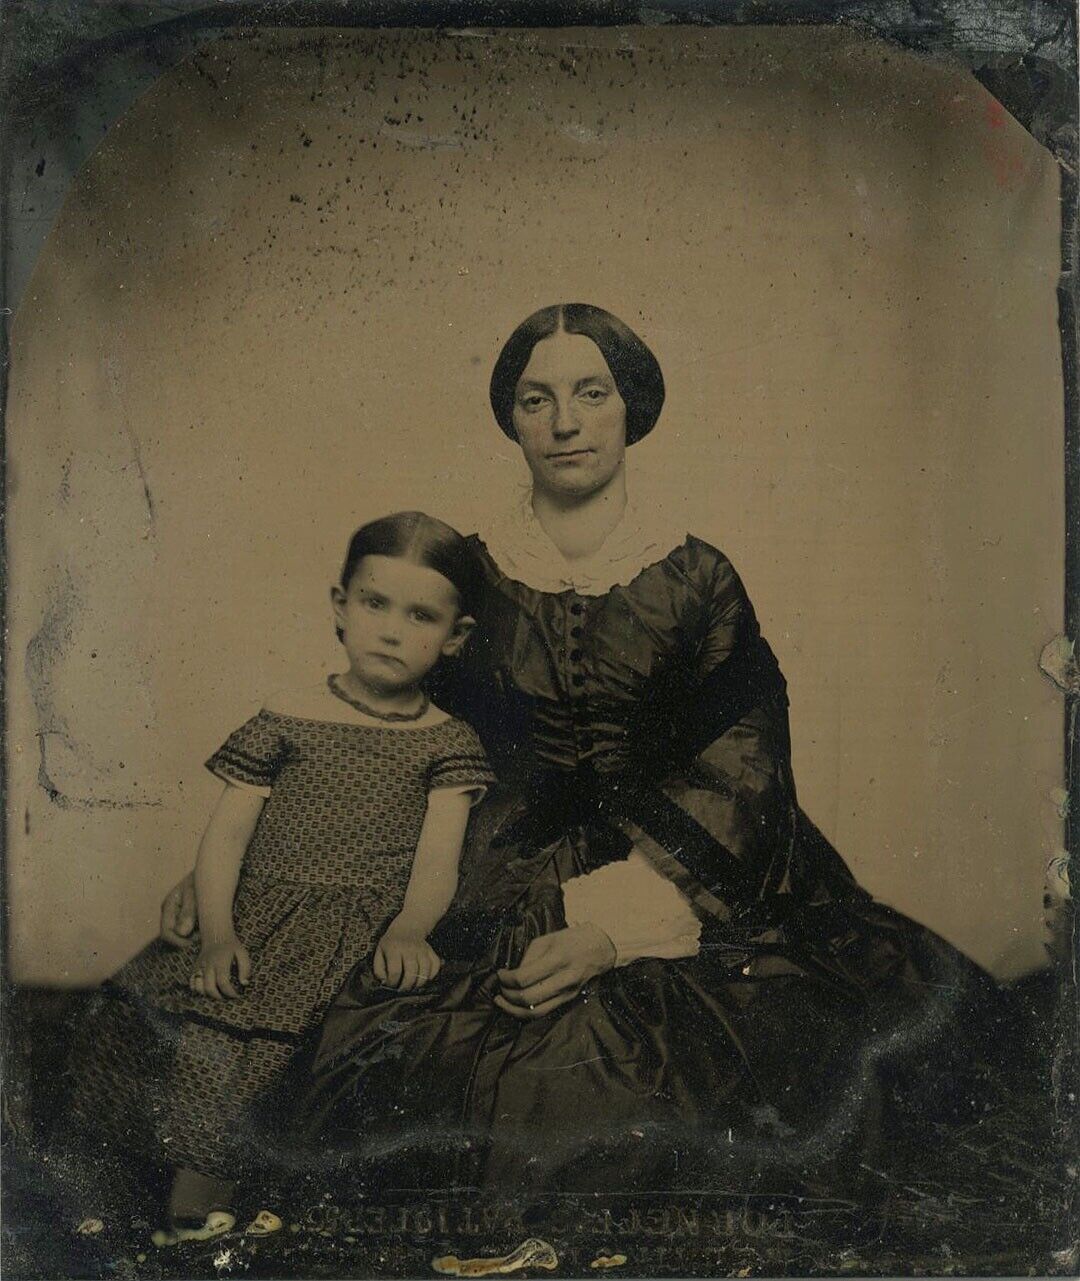 MOM & LITTLE GIRL NICELY POSED FASHION 1850s NEFF\'S PATENT SIXTH PLATE TINTYPE